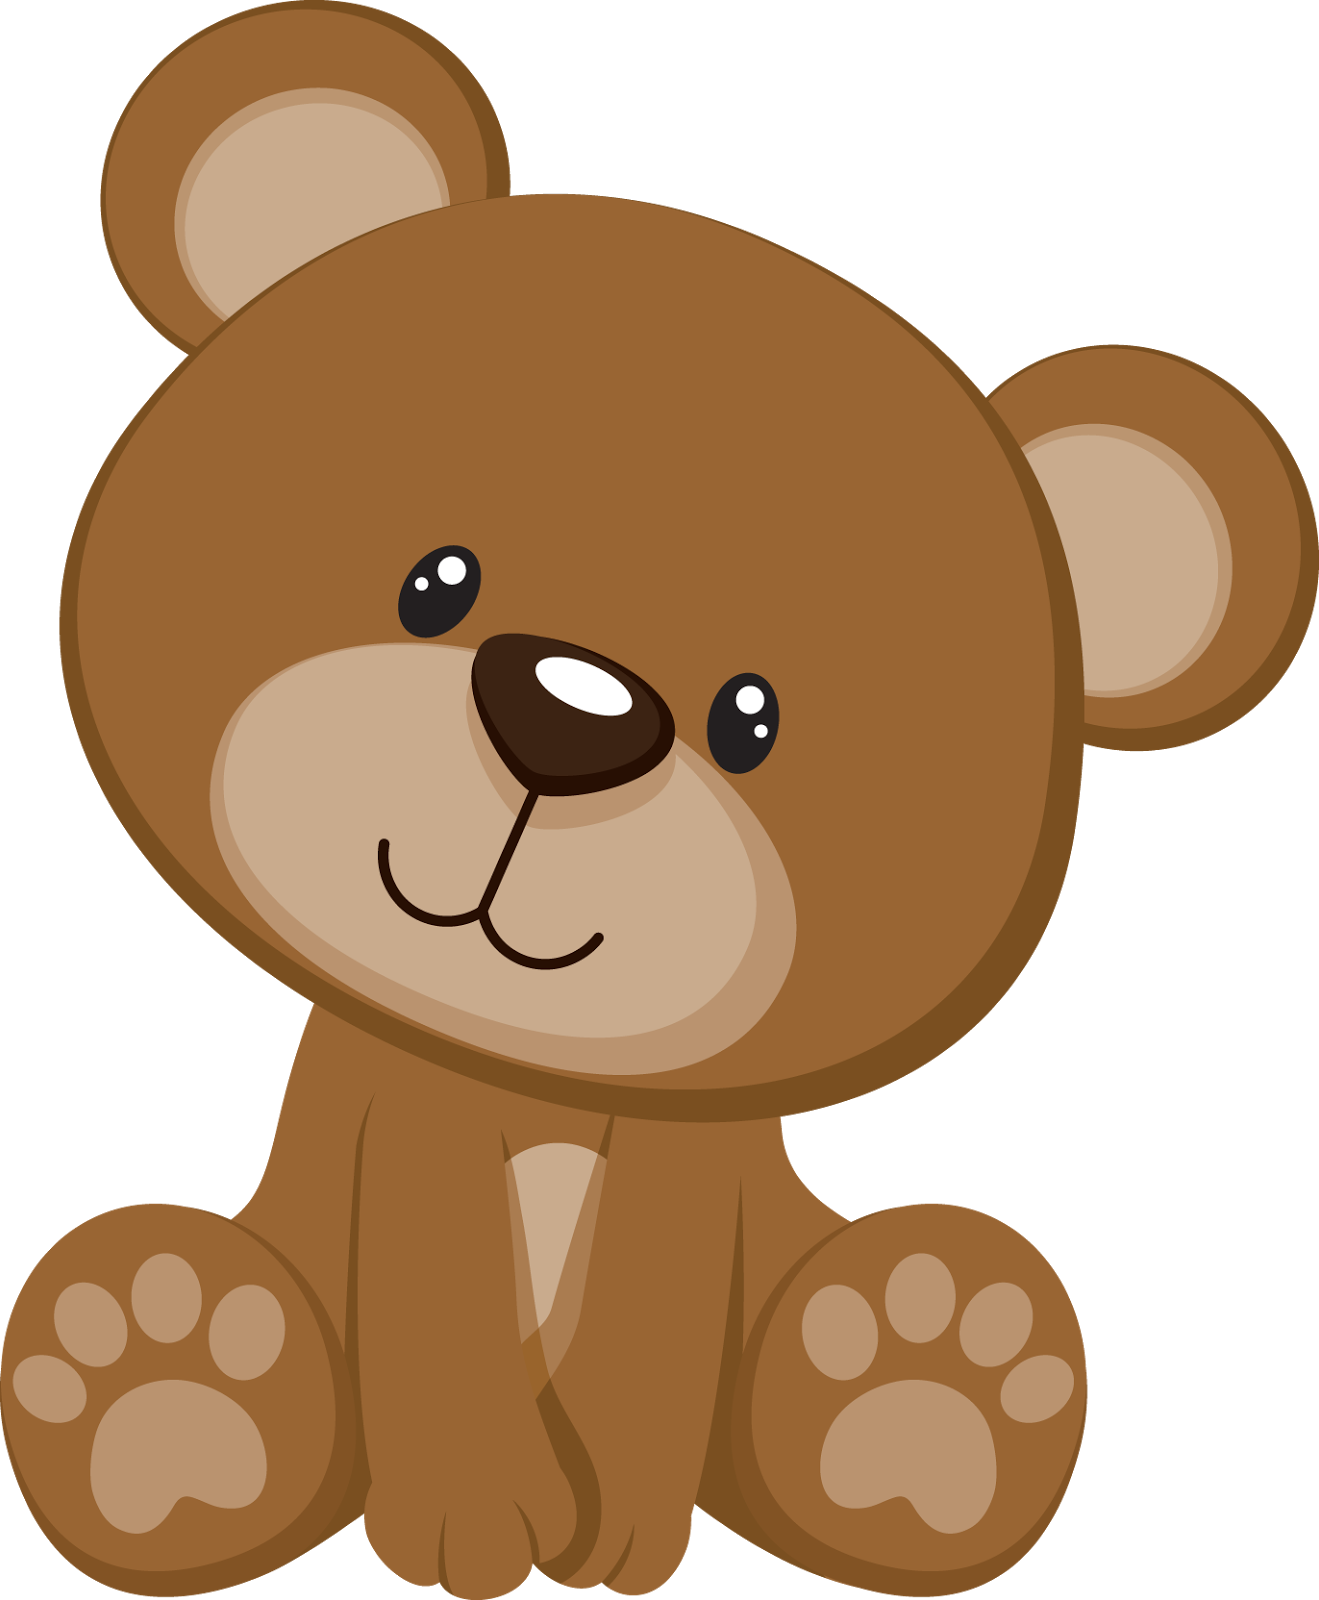 Bear for kids at. Iron clipart cute